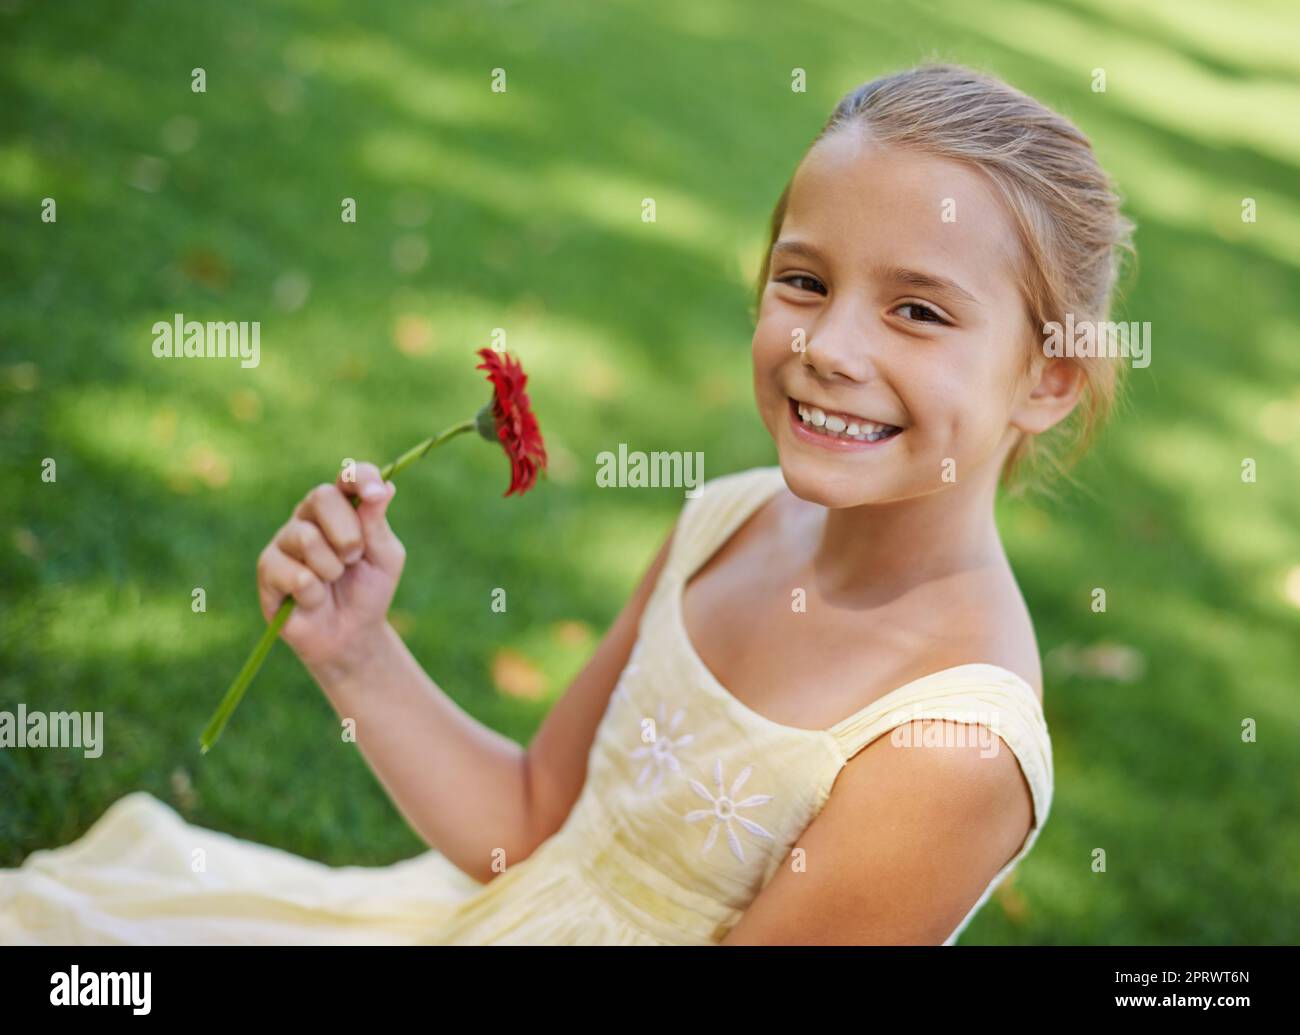 A beautiful flower for a beautiful girl. A portrait of a beautiful little girl holding sitting outside on the grass with a beautiful red flower. Stock Photo